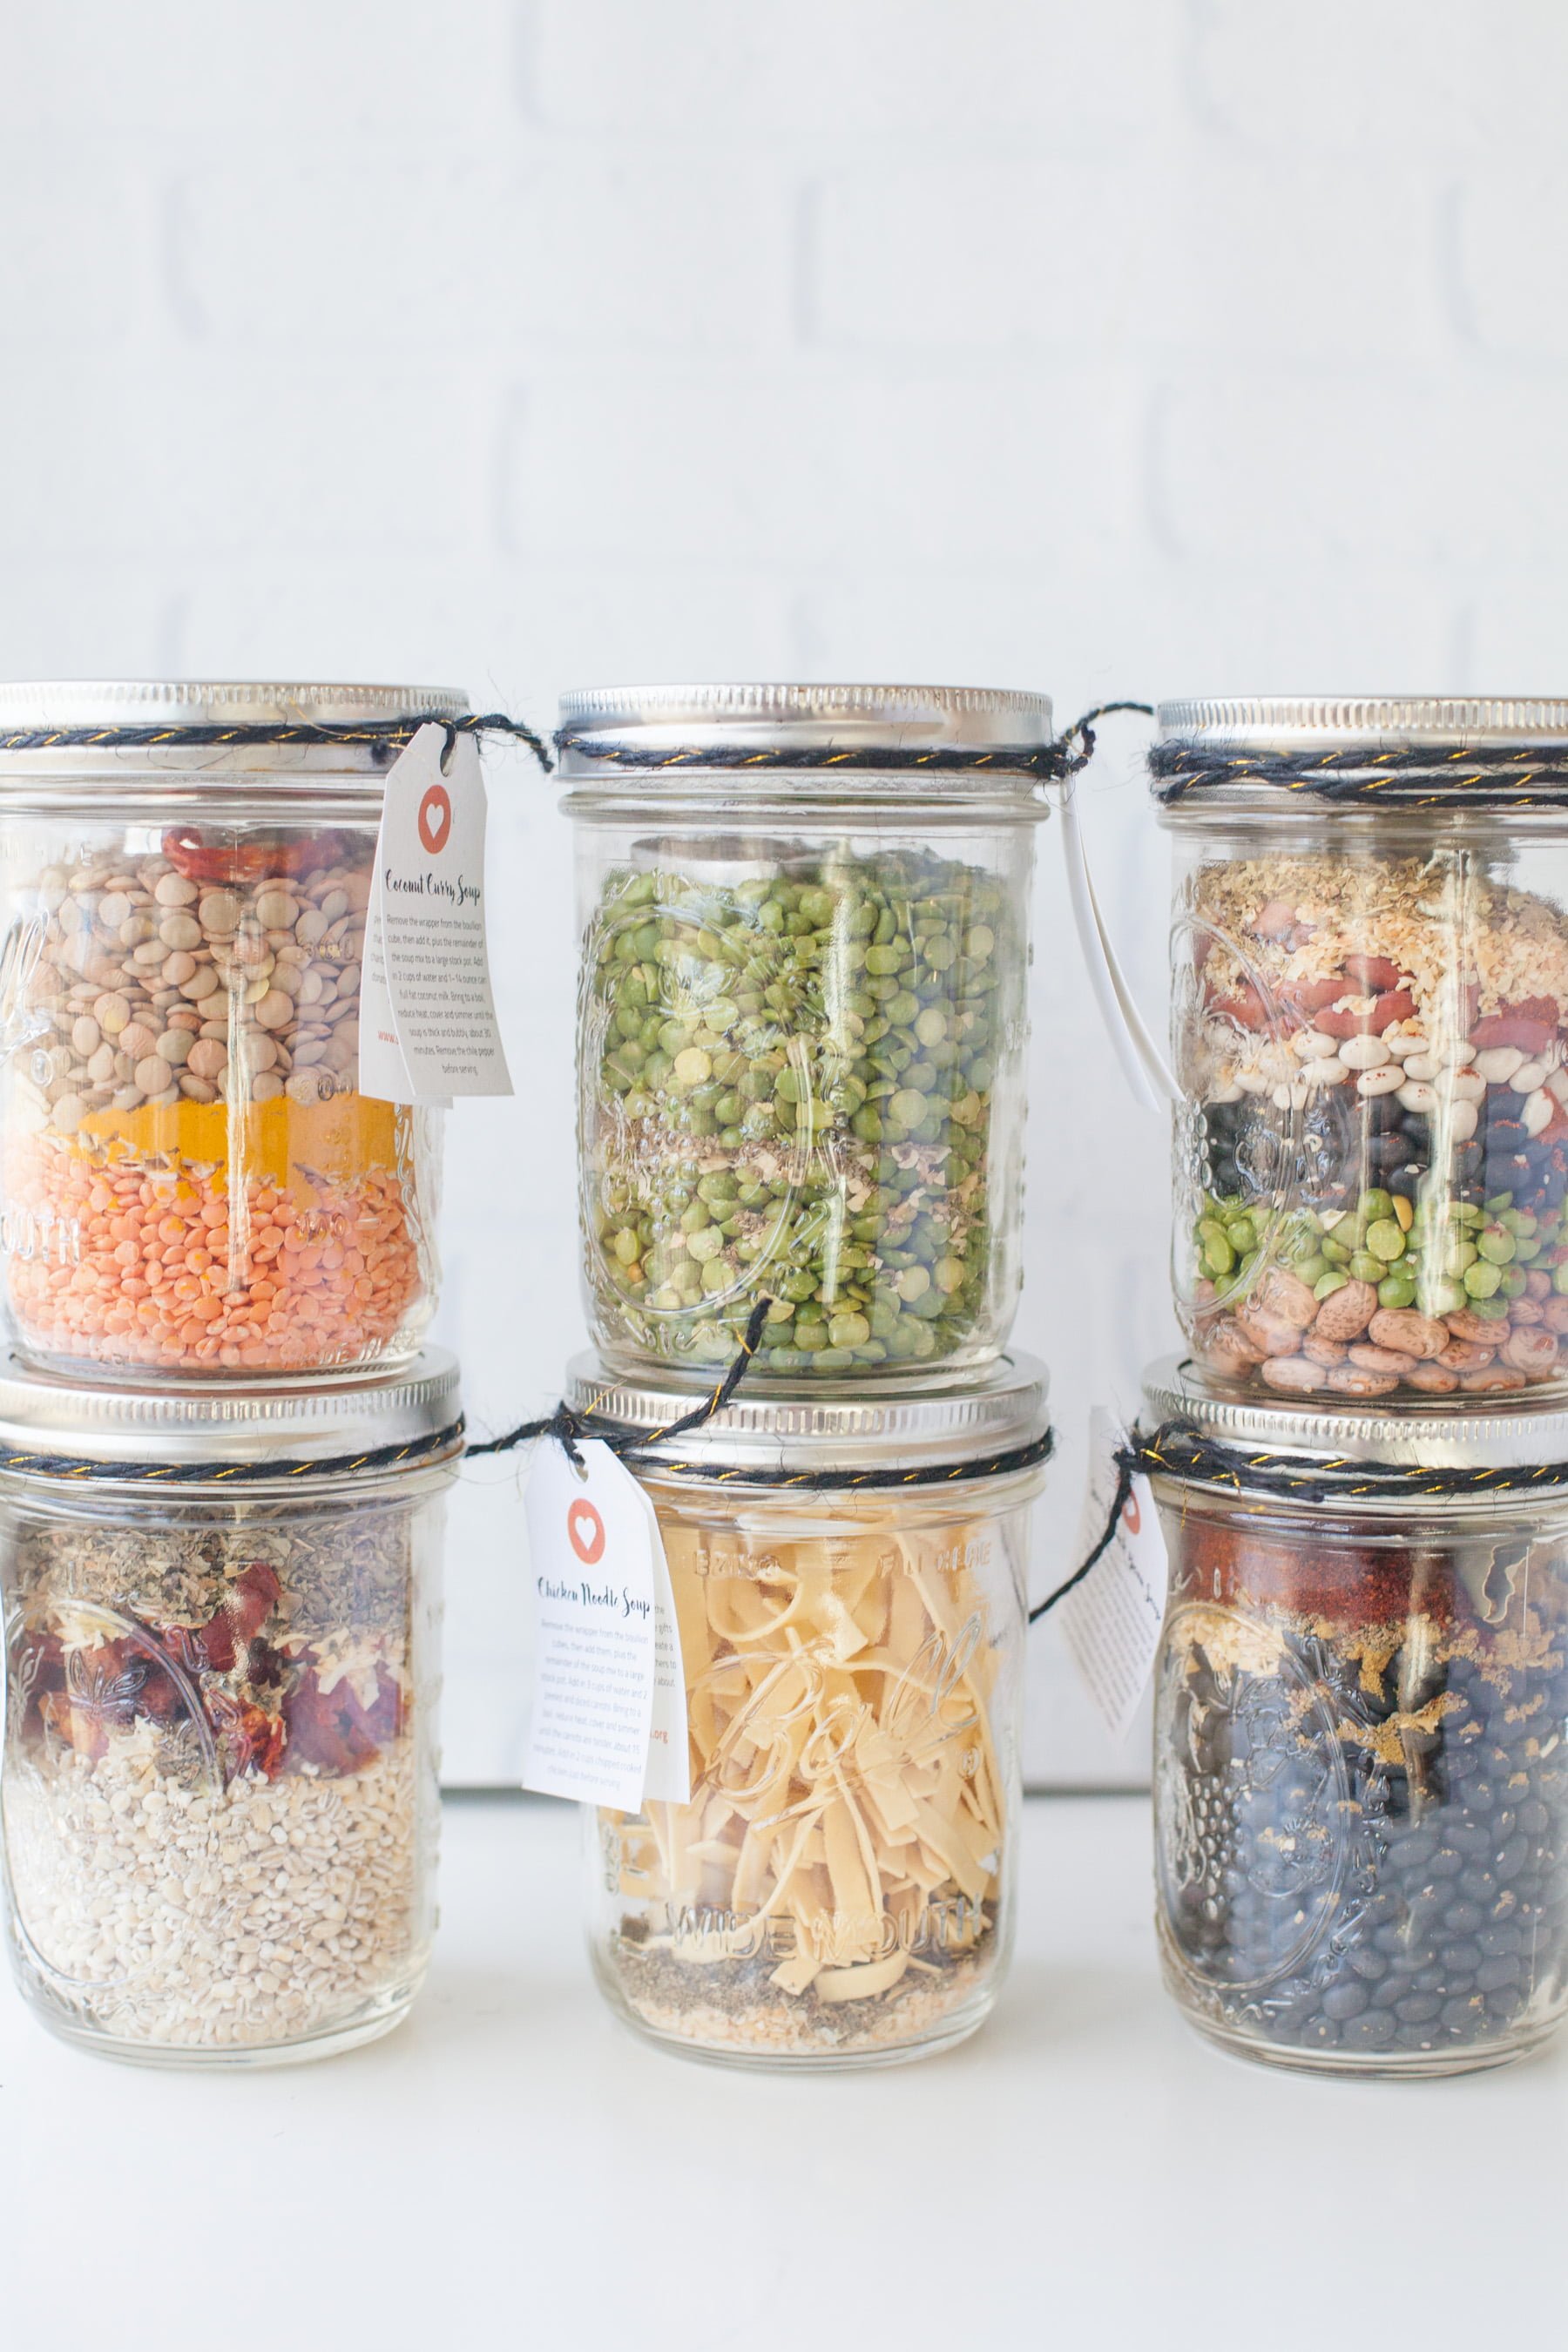 Six jars filled with dry ingredients stacked in two rows of three